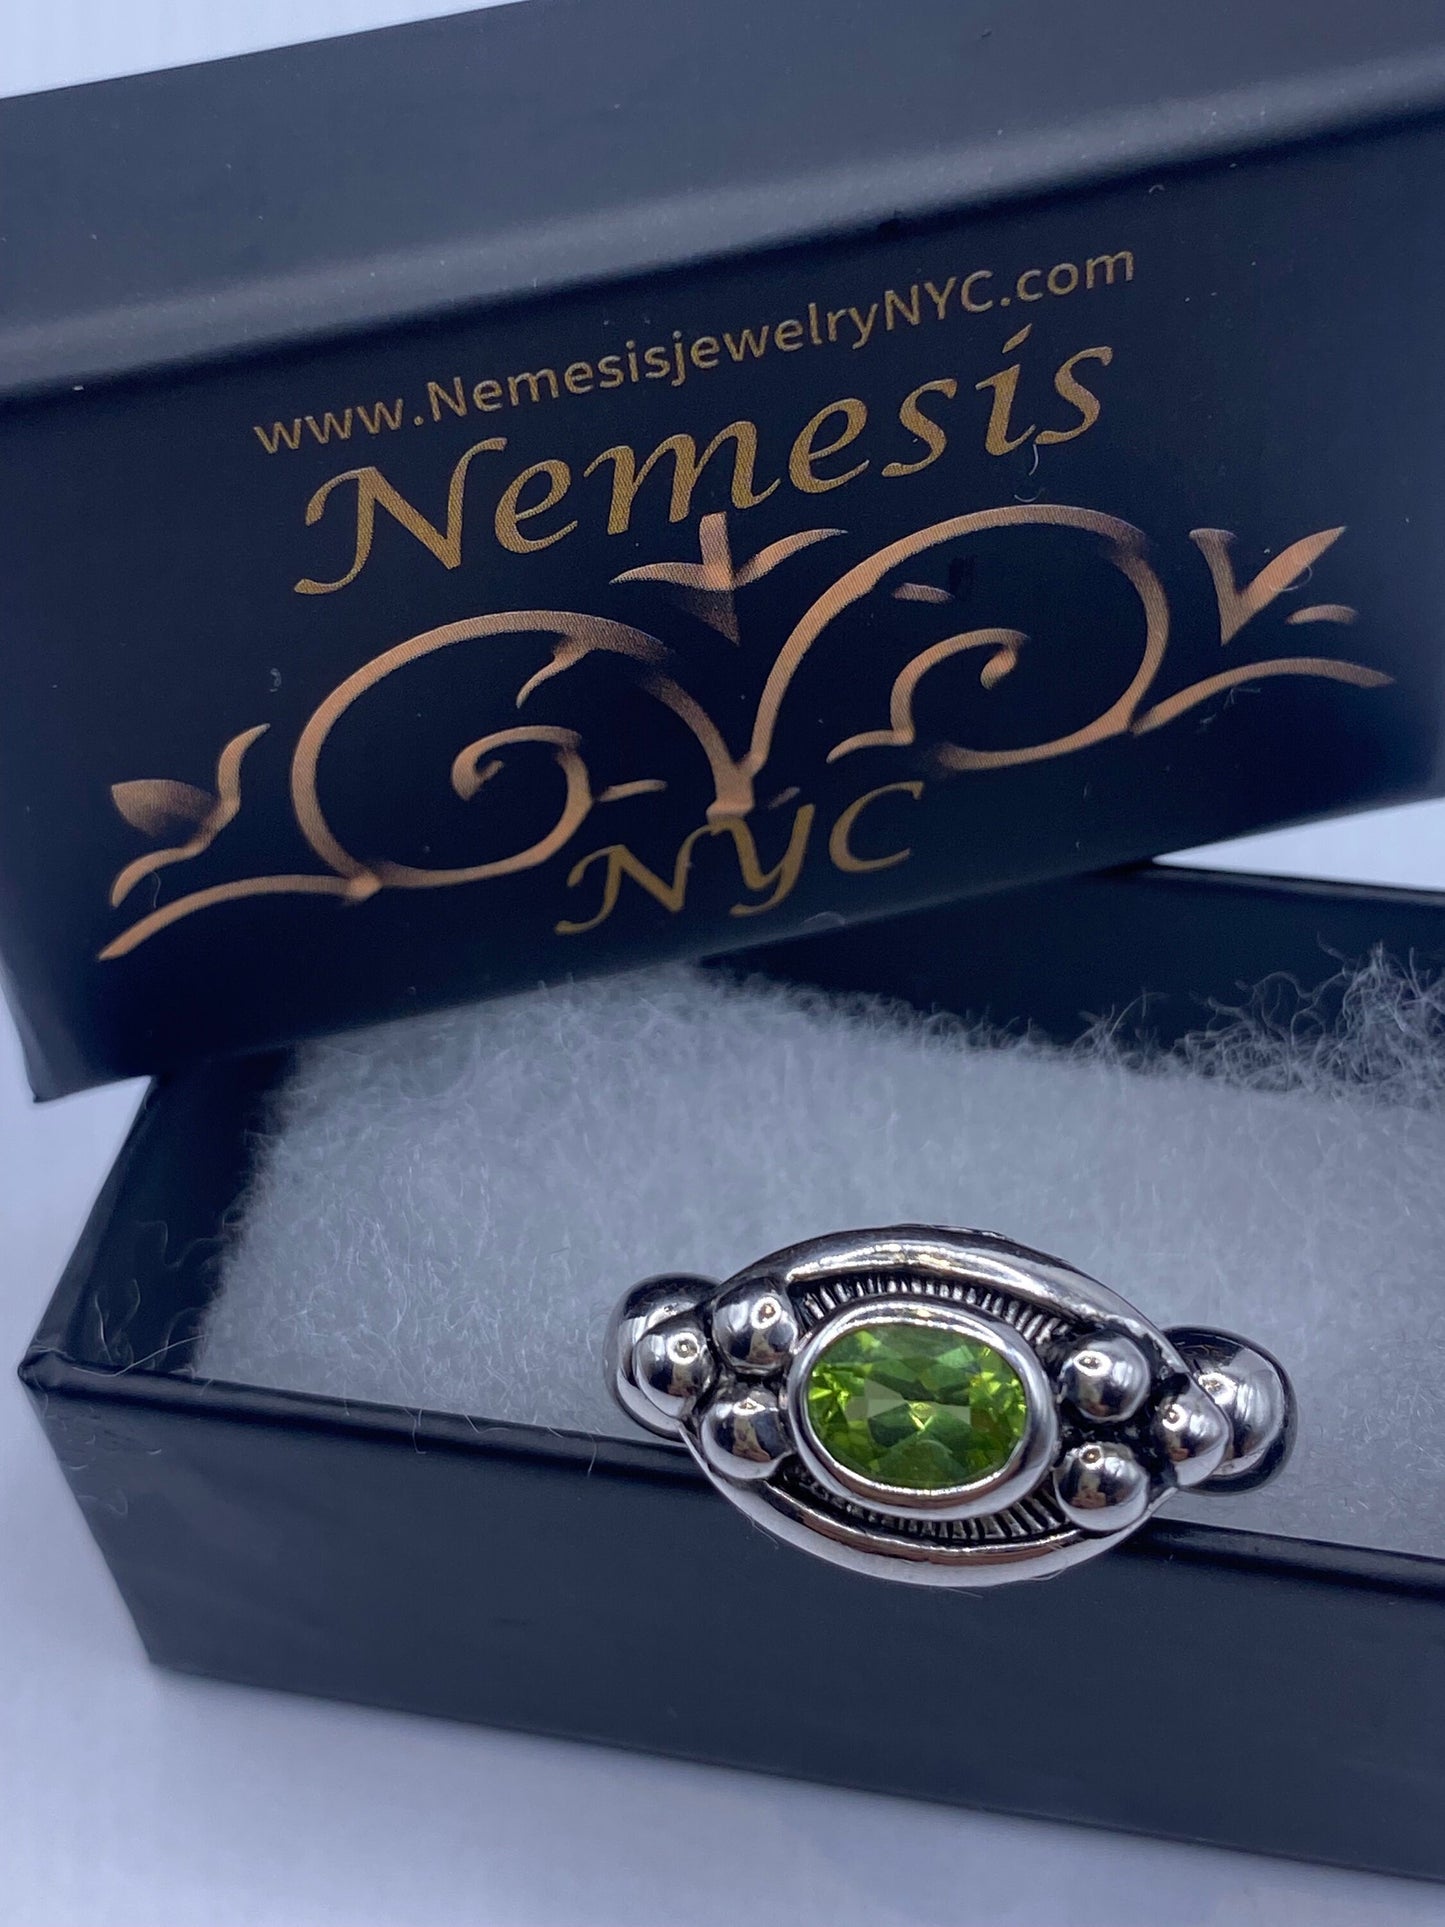 Vintage Green Peridot Filigree 925 Sterling Silver Cocktail Ring